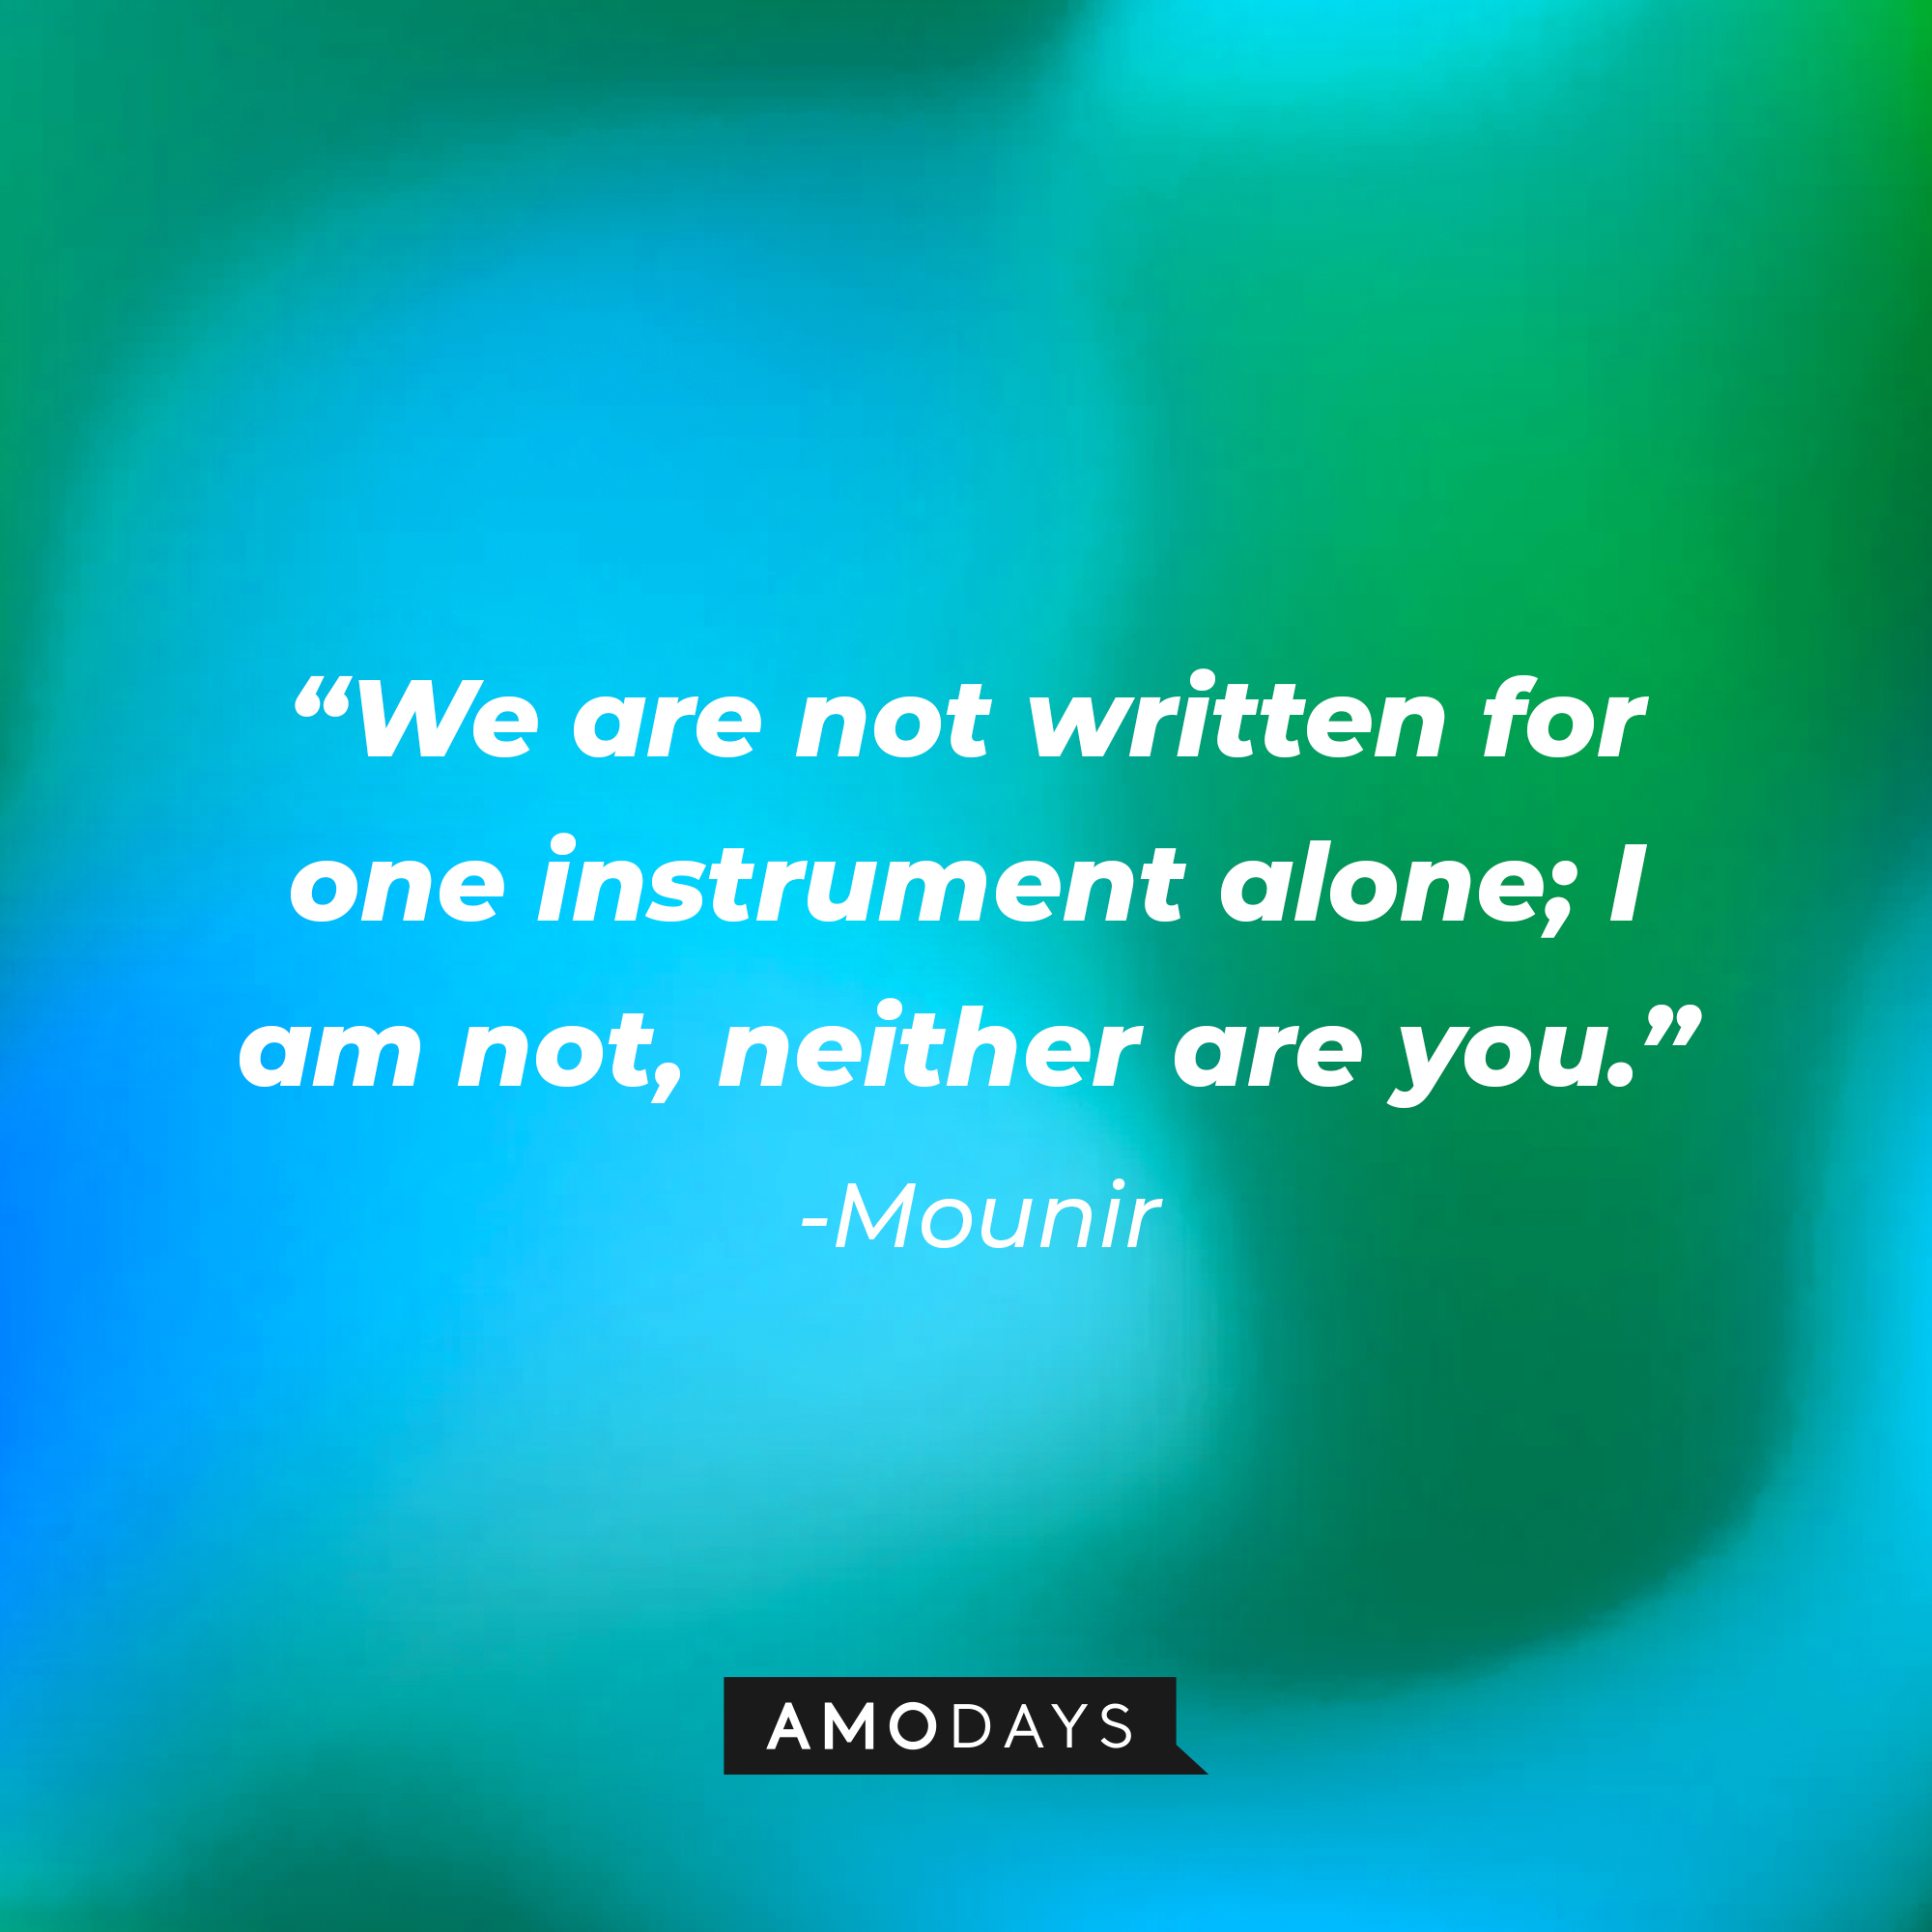 Mounir's quote: "We are not written for one instrument alone; I am not, nether are you." | Source: AmoDays